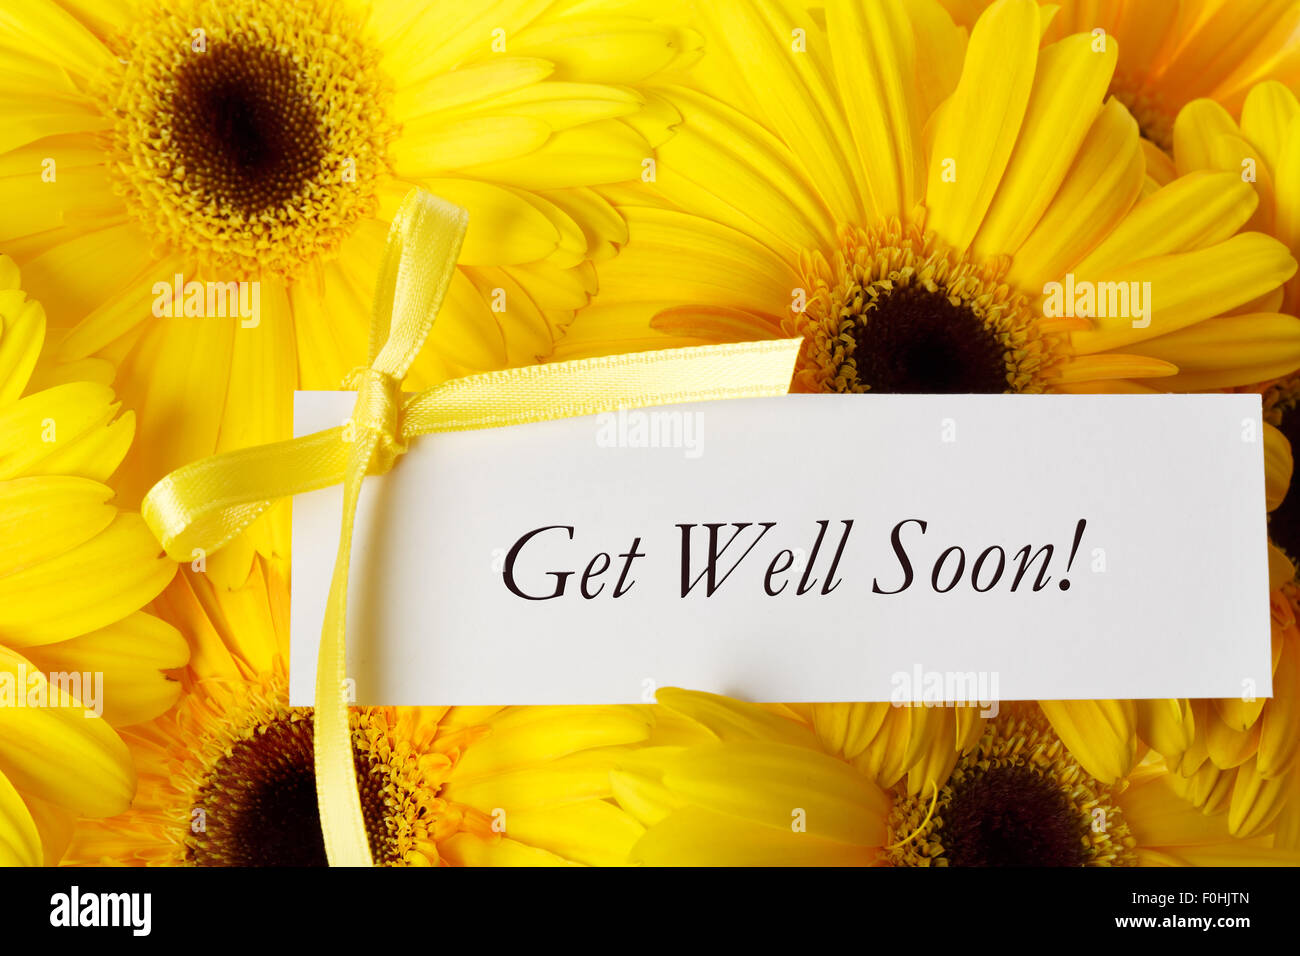 Get Well Soon - Elarn03 Picture #121293950